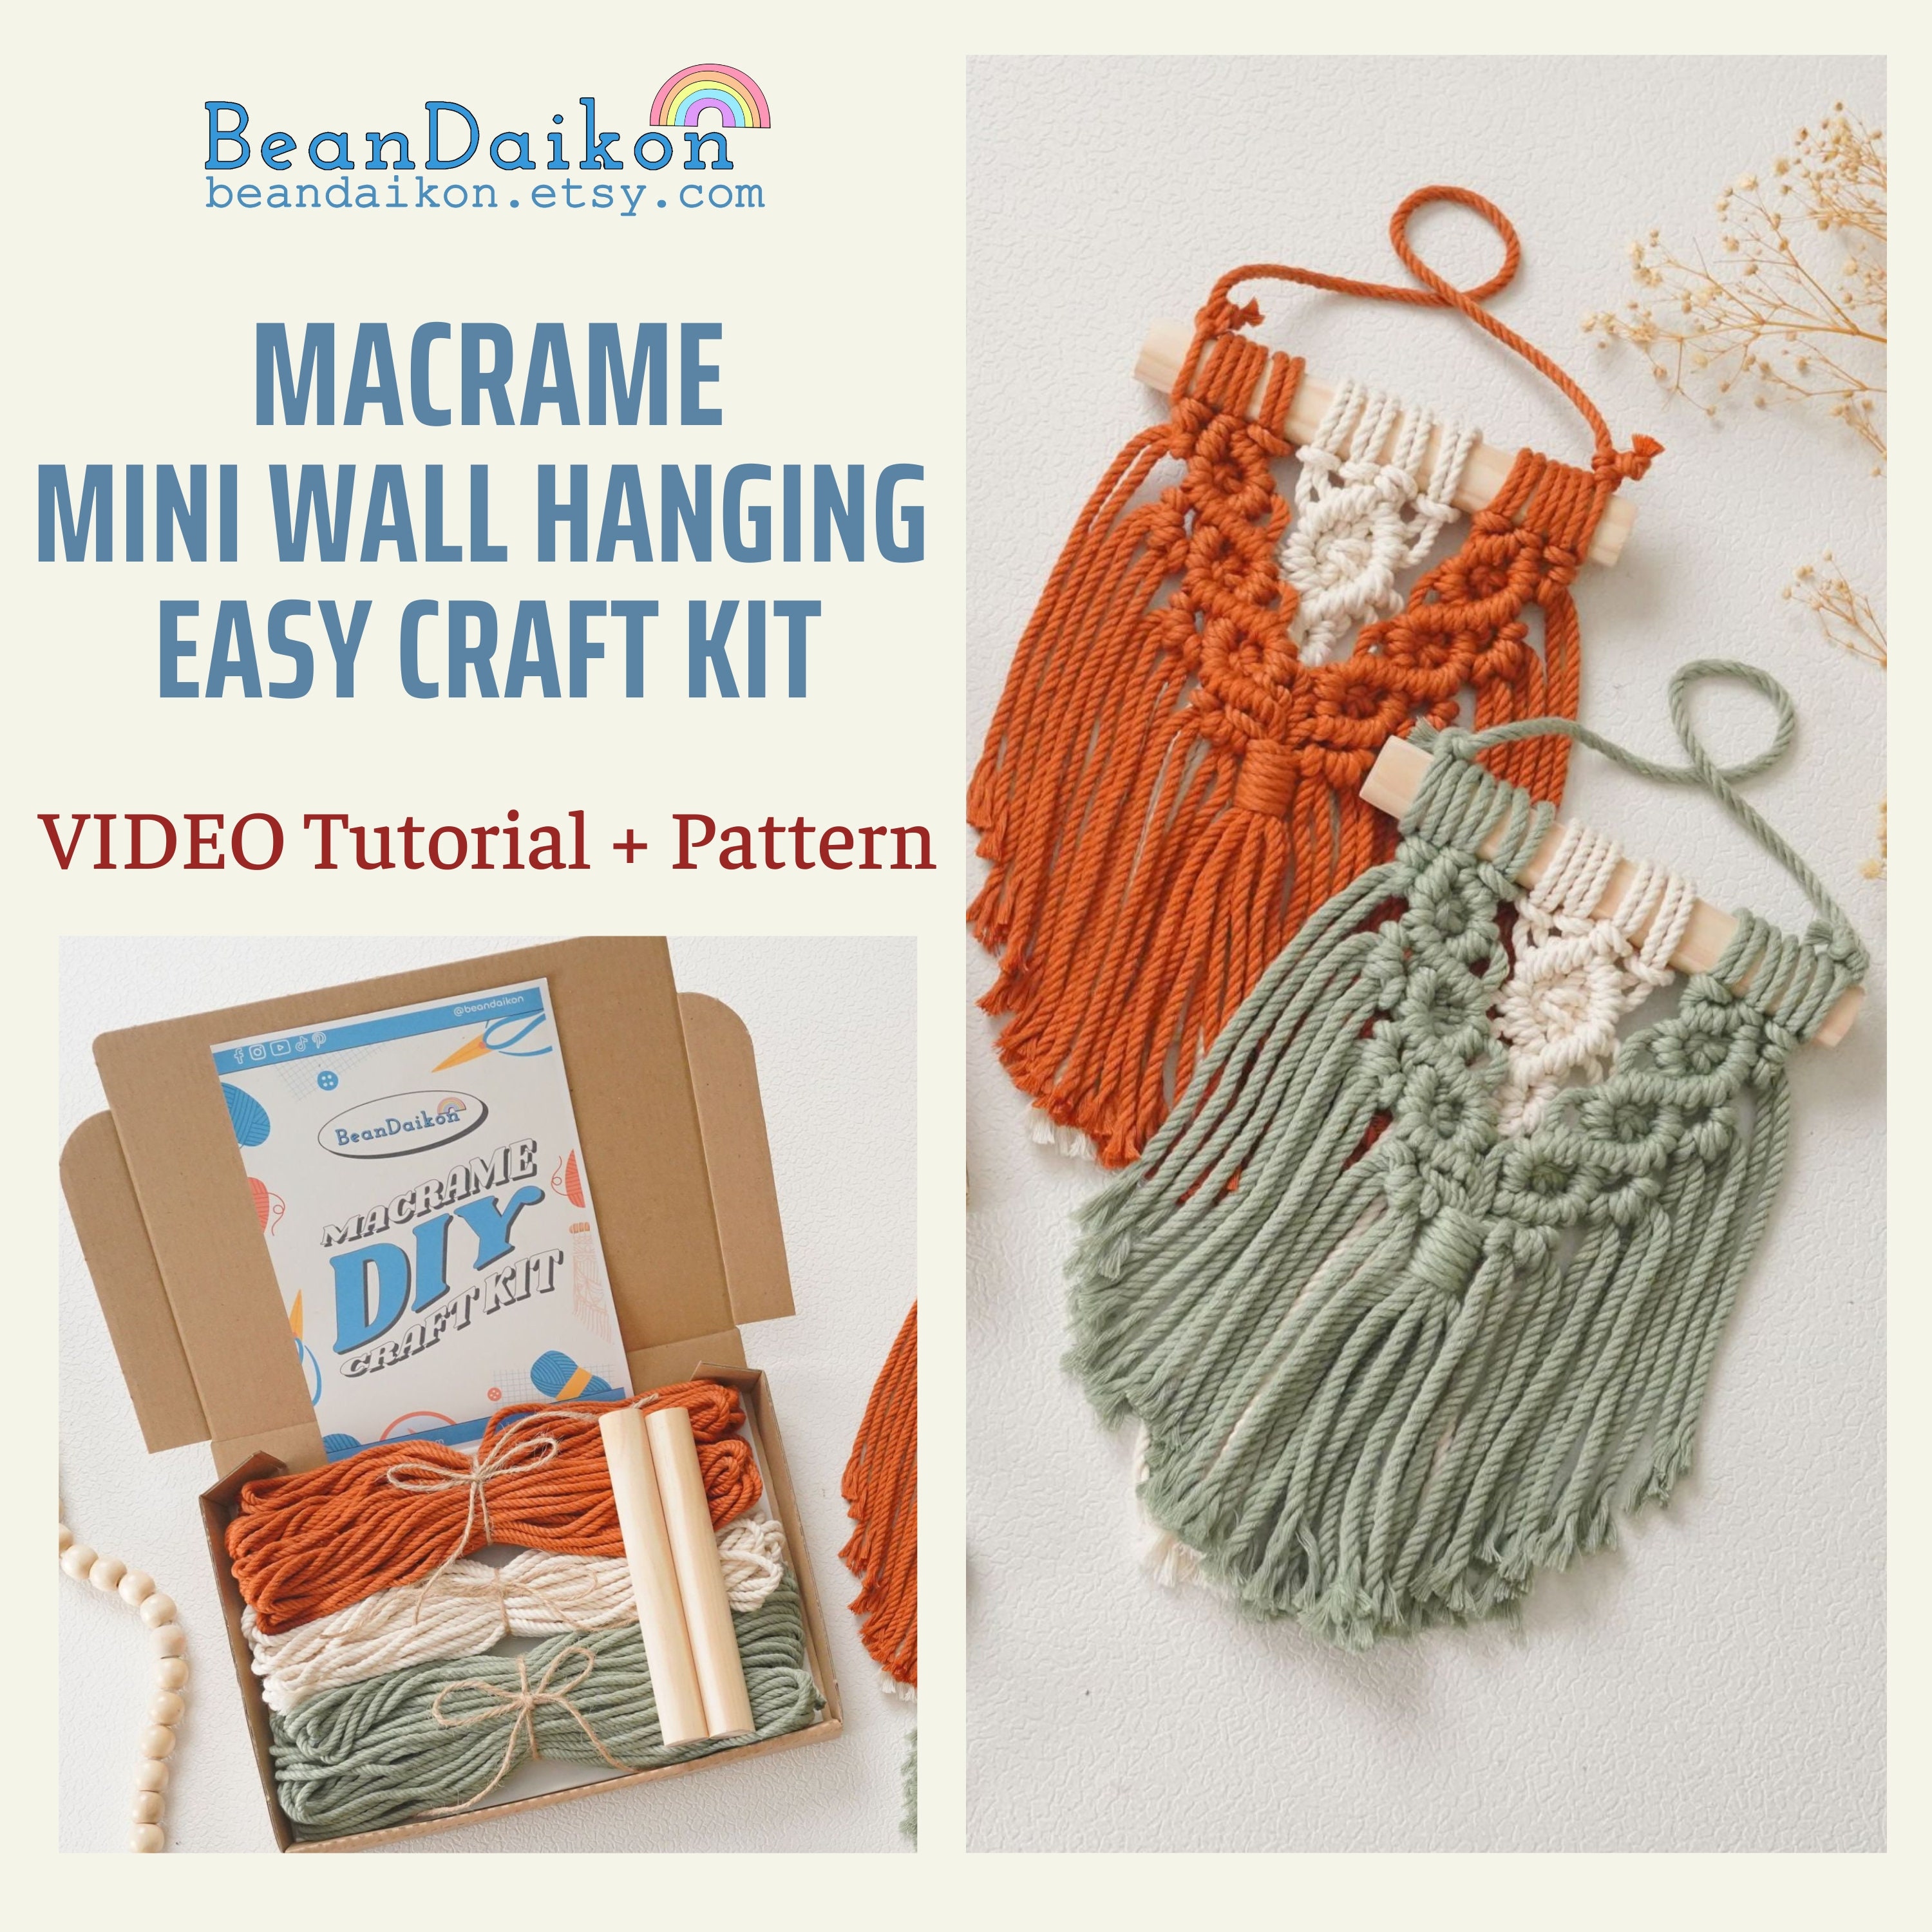  Moon+Star Macrame Kit, 2 in 1 Macrame Kits for Adults  Beginners, Includes Macrame Cord and Instruction with Video, Macrame Wall  Hanging Supplies, Craft Kits for Adults DIY Dream Catcher Kit 